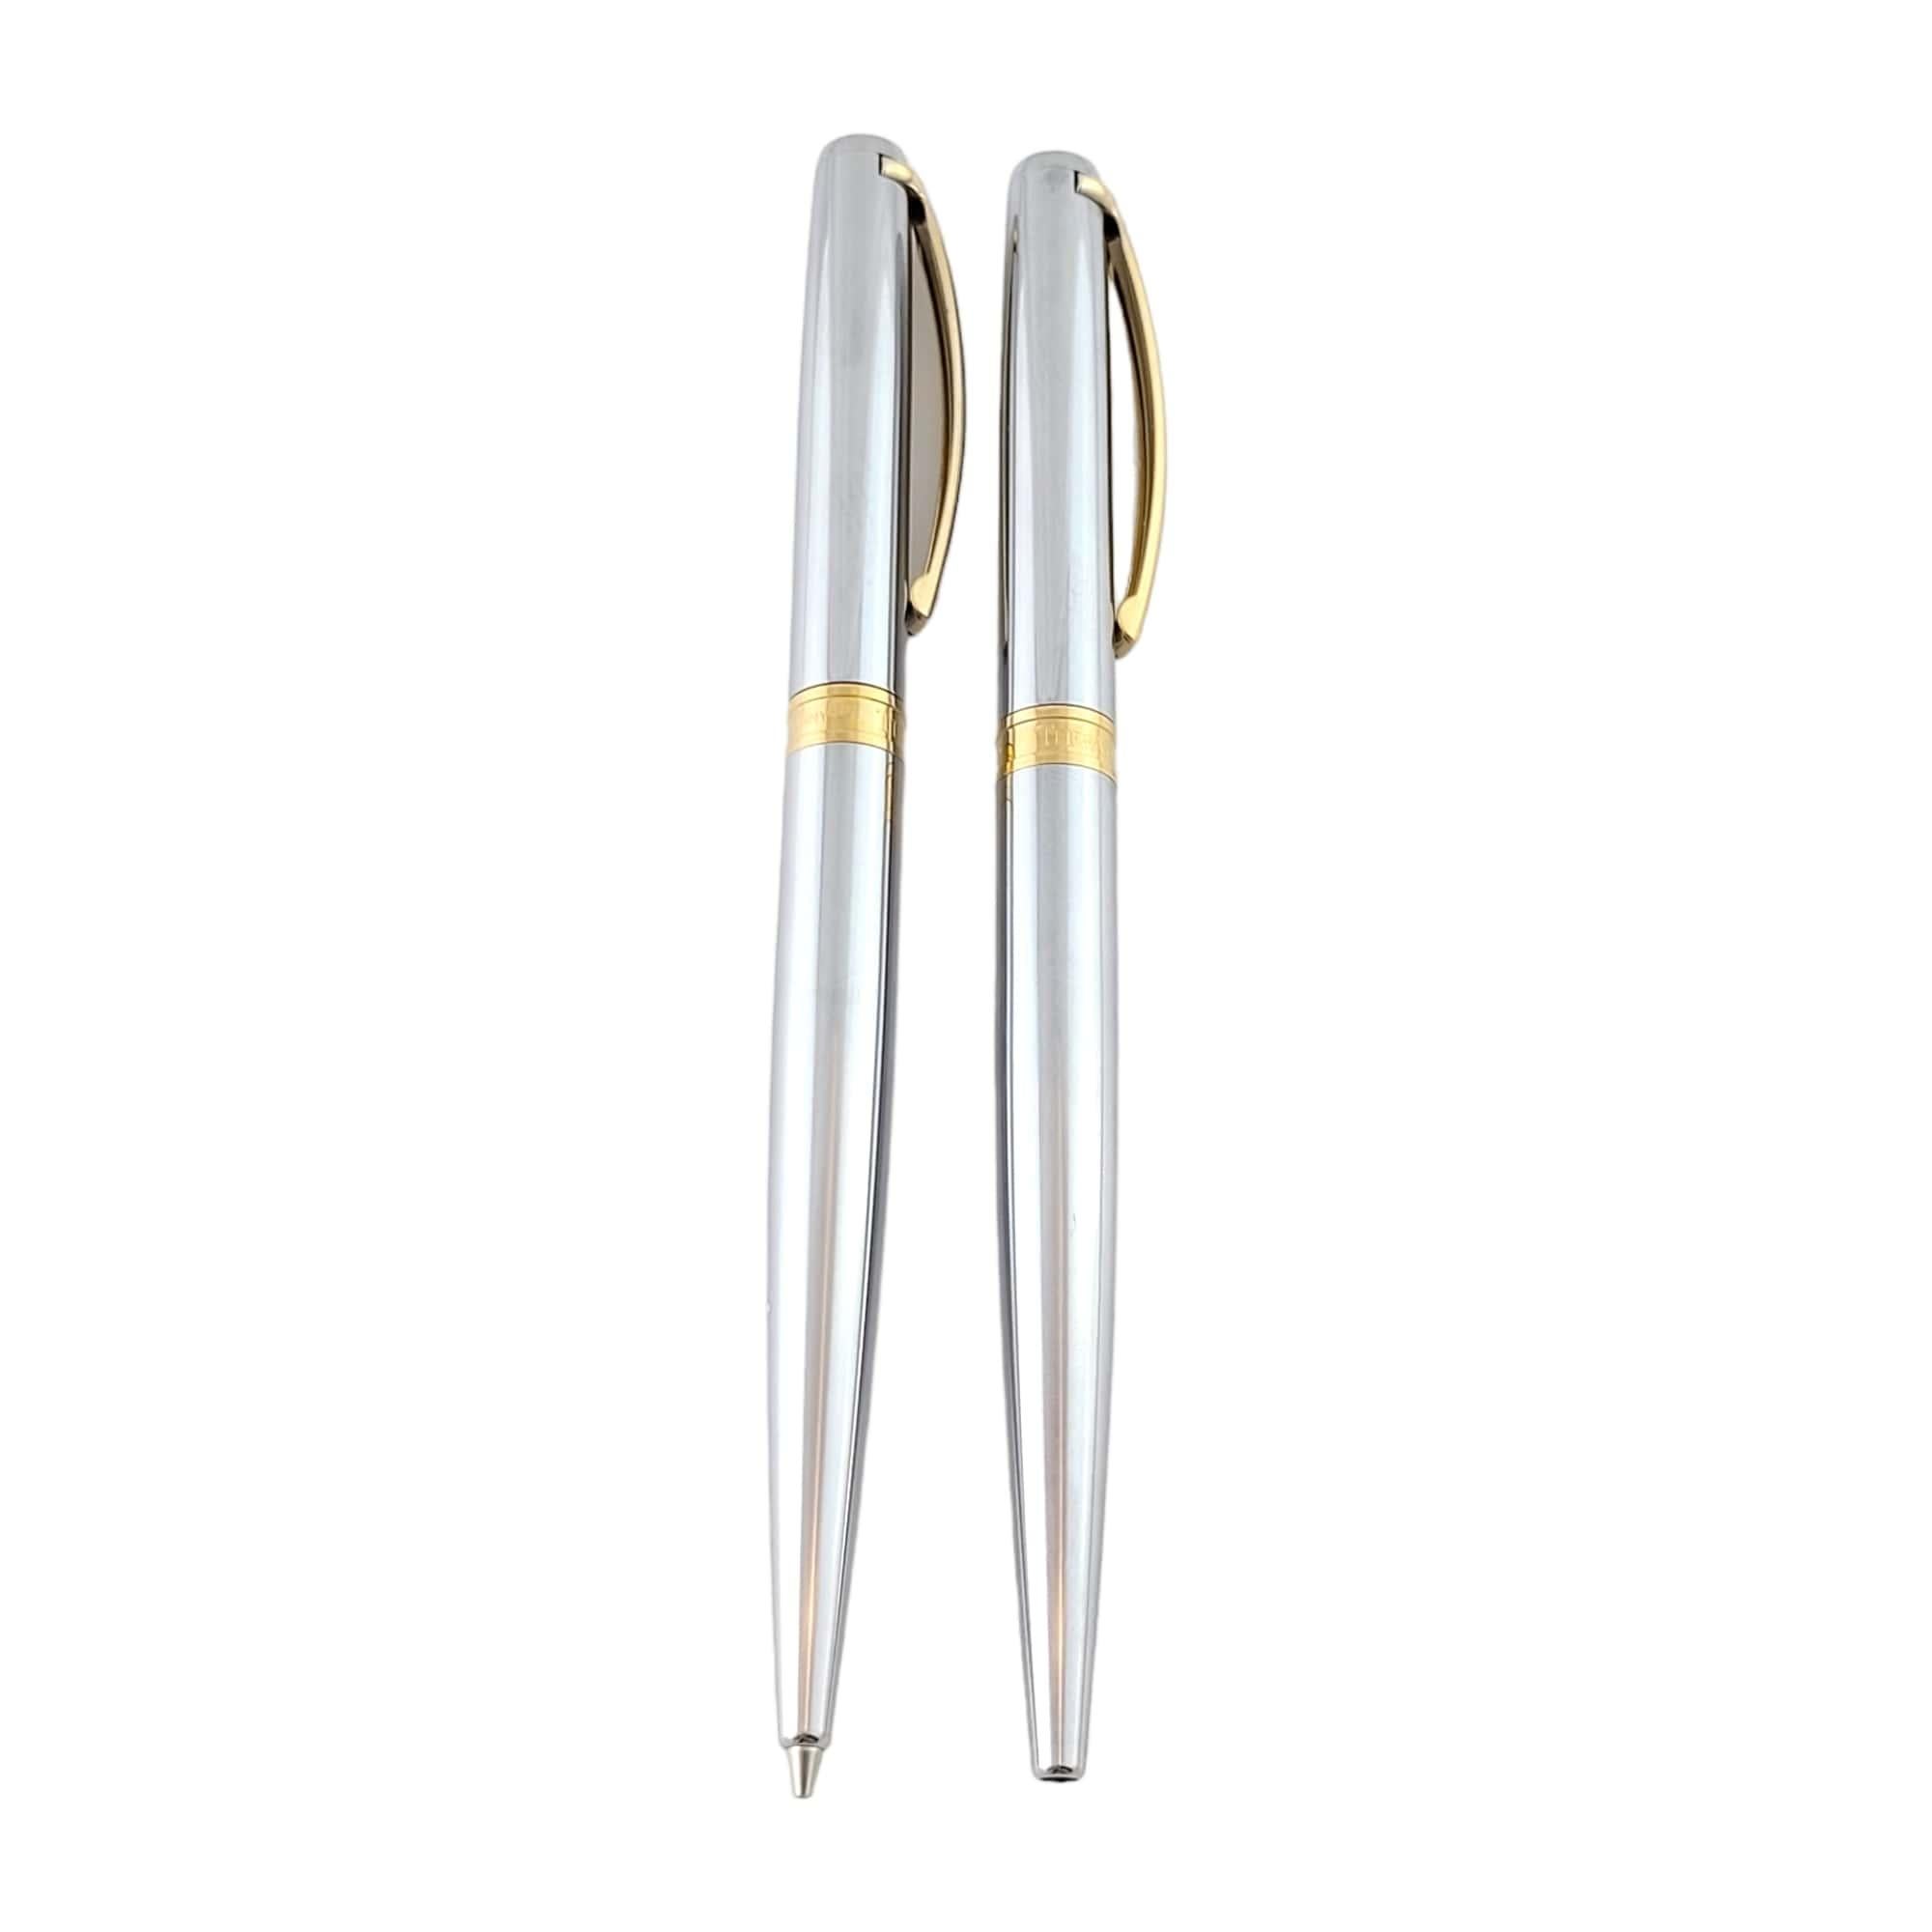 Tiffany & Co Two Tone T Clip Pen and Pencil Set

Gorgeous set with two tone pen and pencil decorated with gold detailing by Tiffany & Co. Both instruments are in working order and write.

Pen length:  1/4